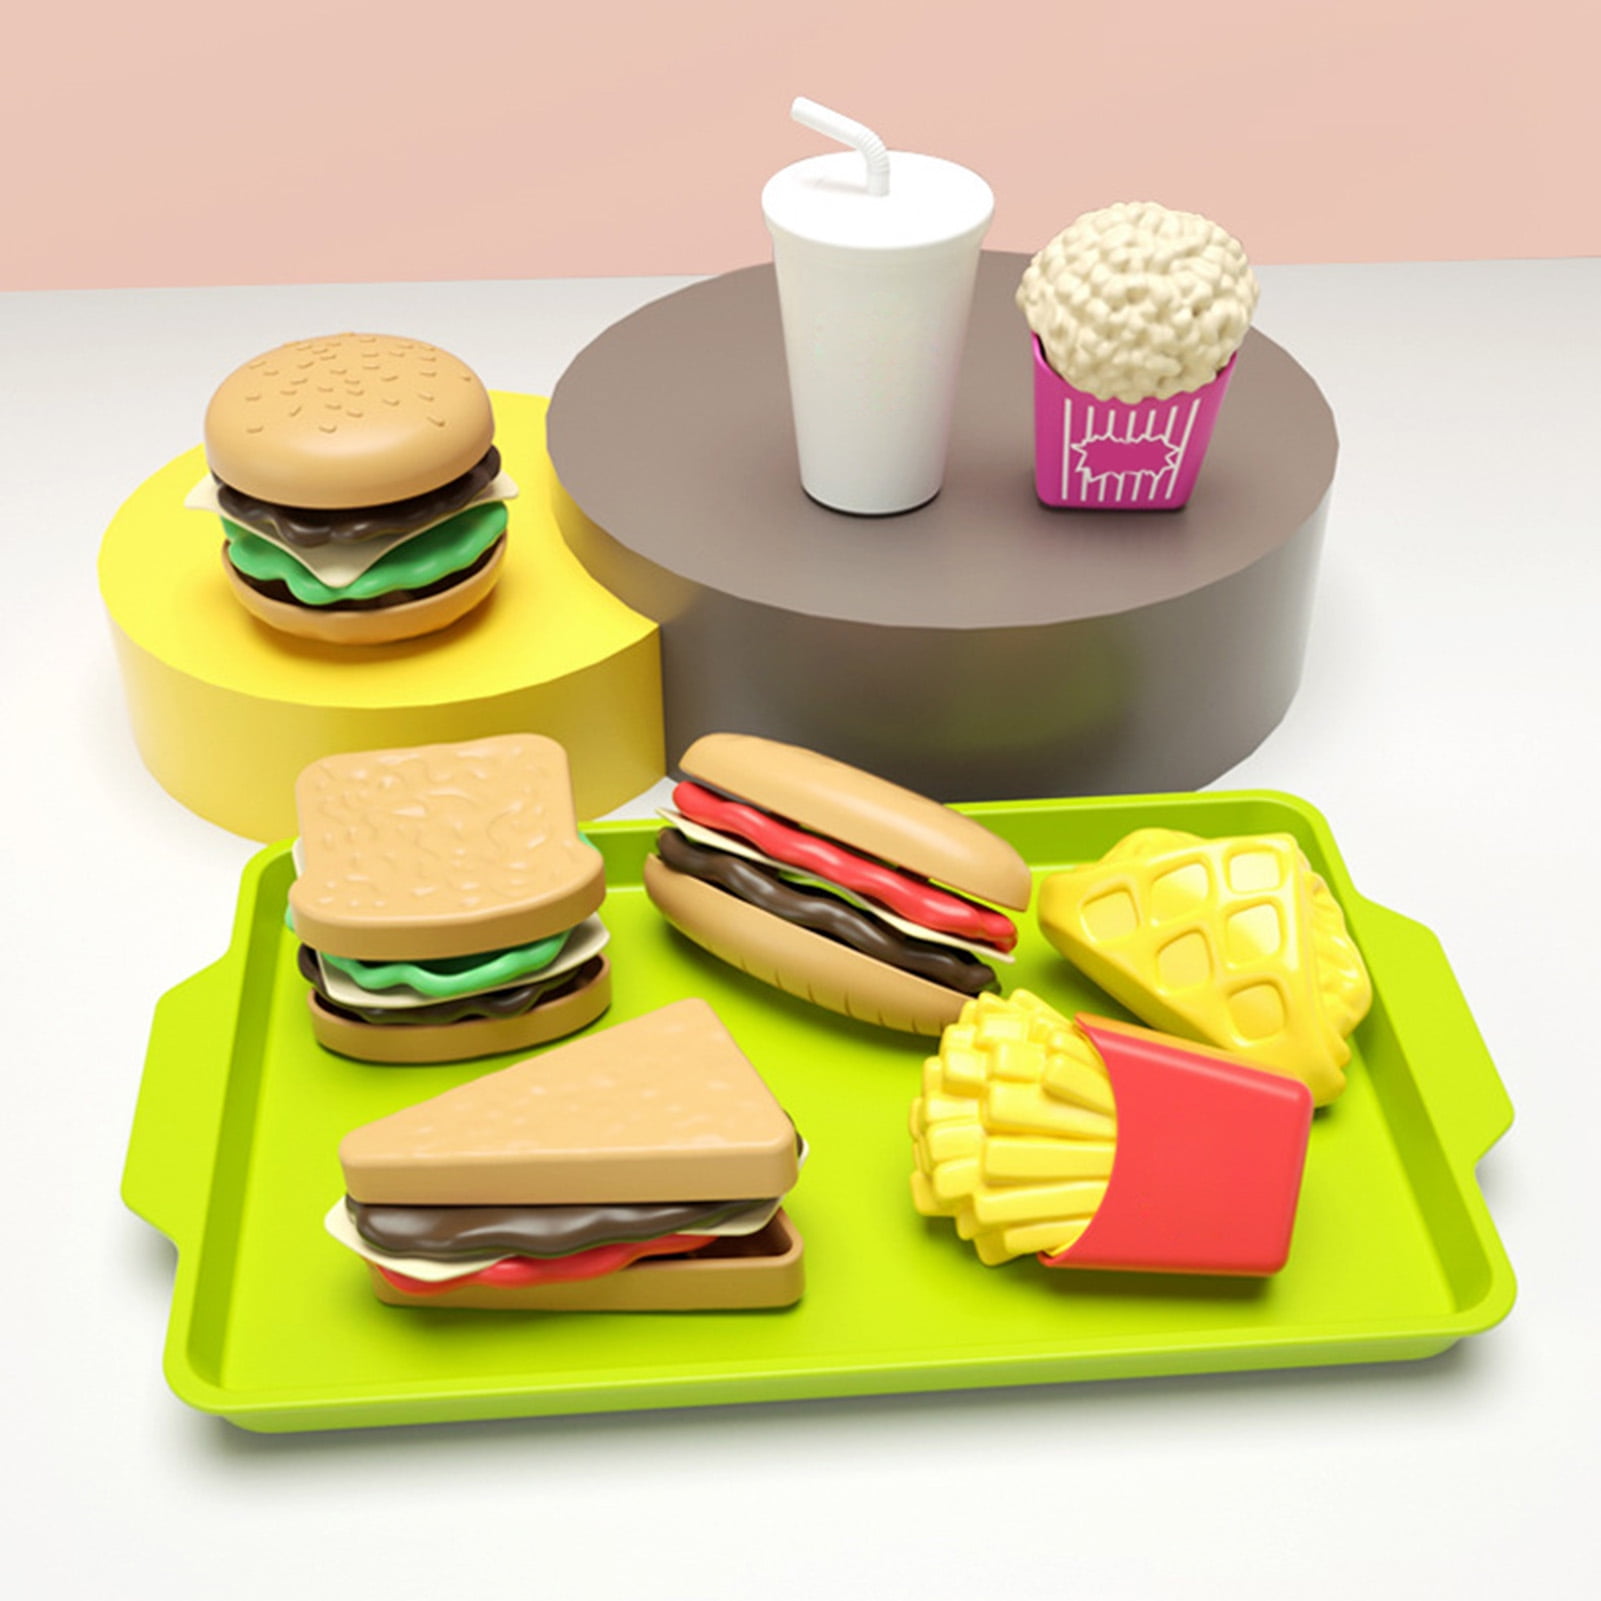 Burger Fast Food Play set Pretend kitchen toy food set for kids and toddlers 